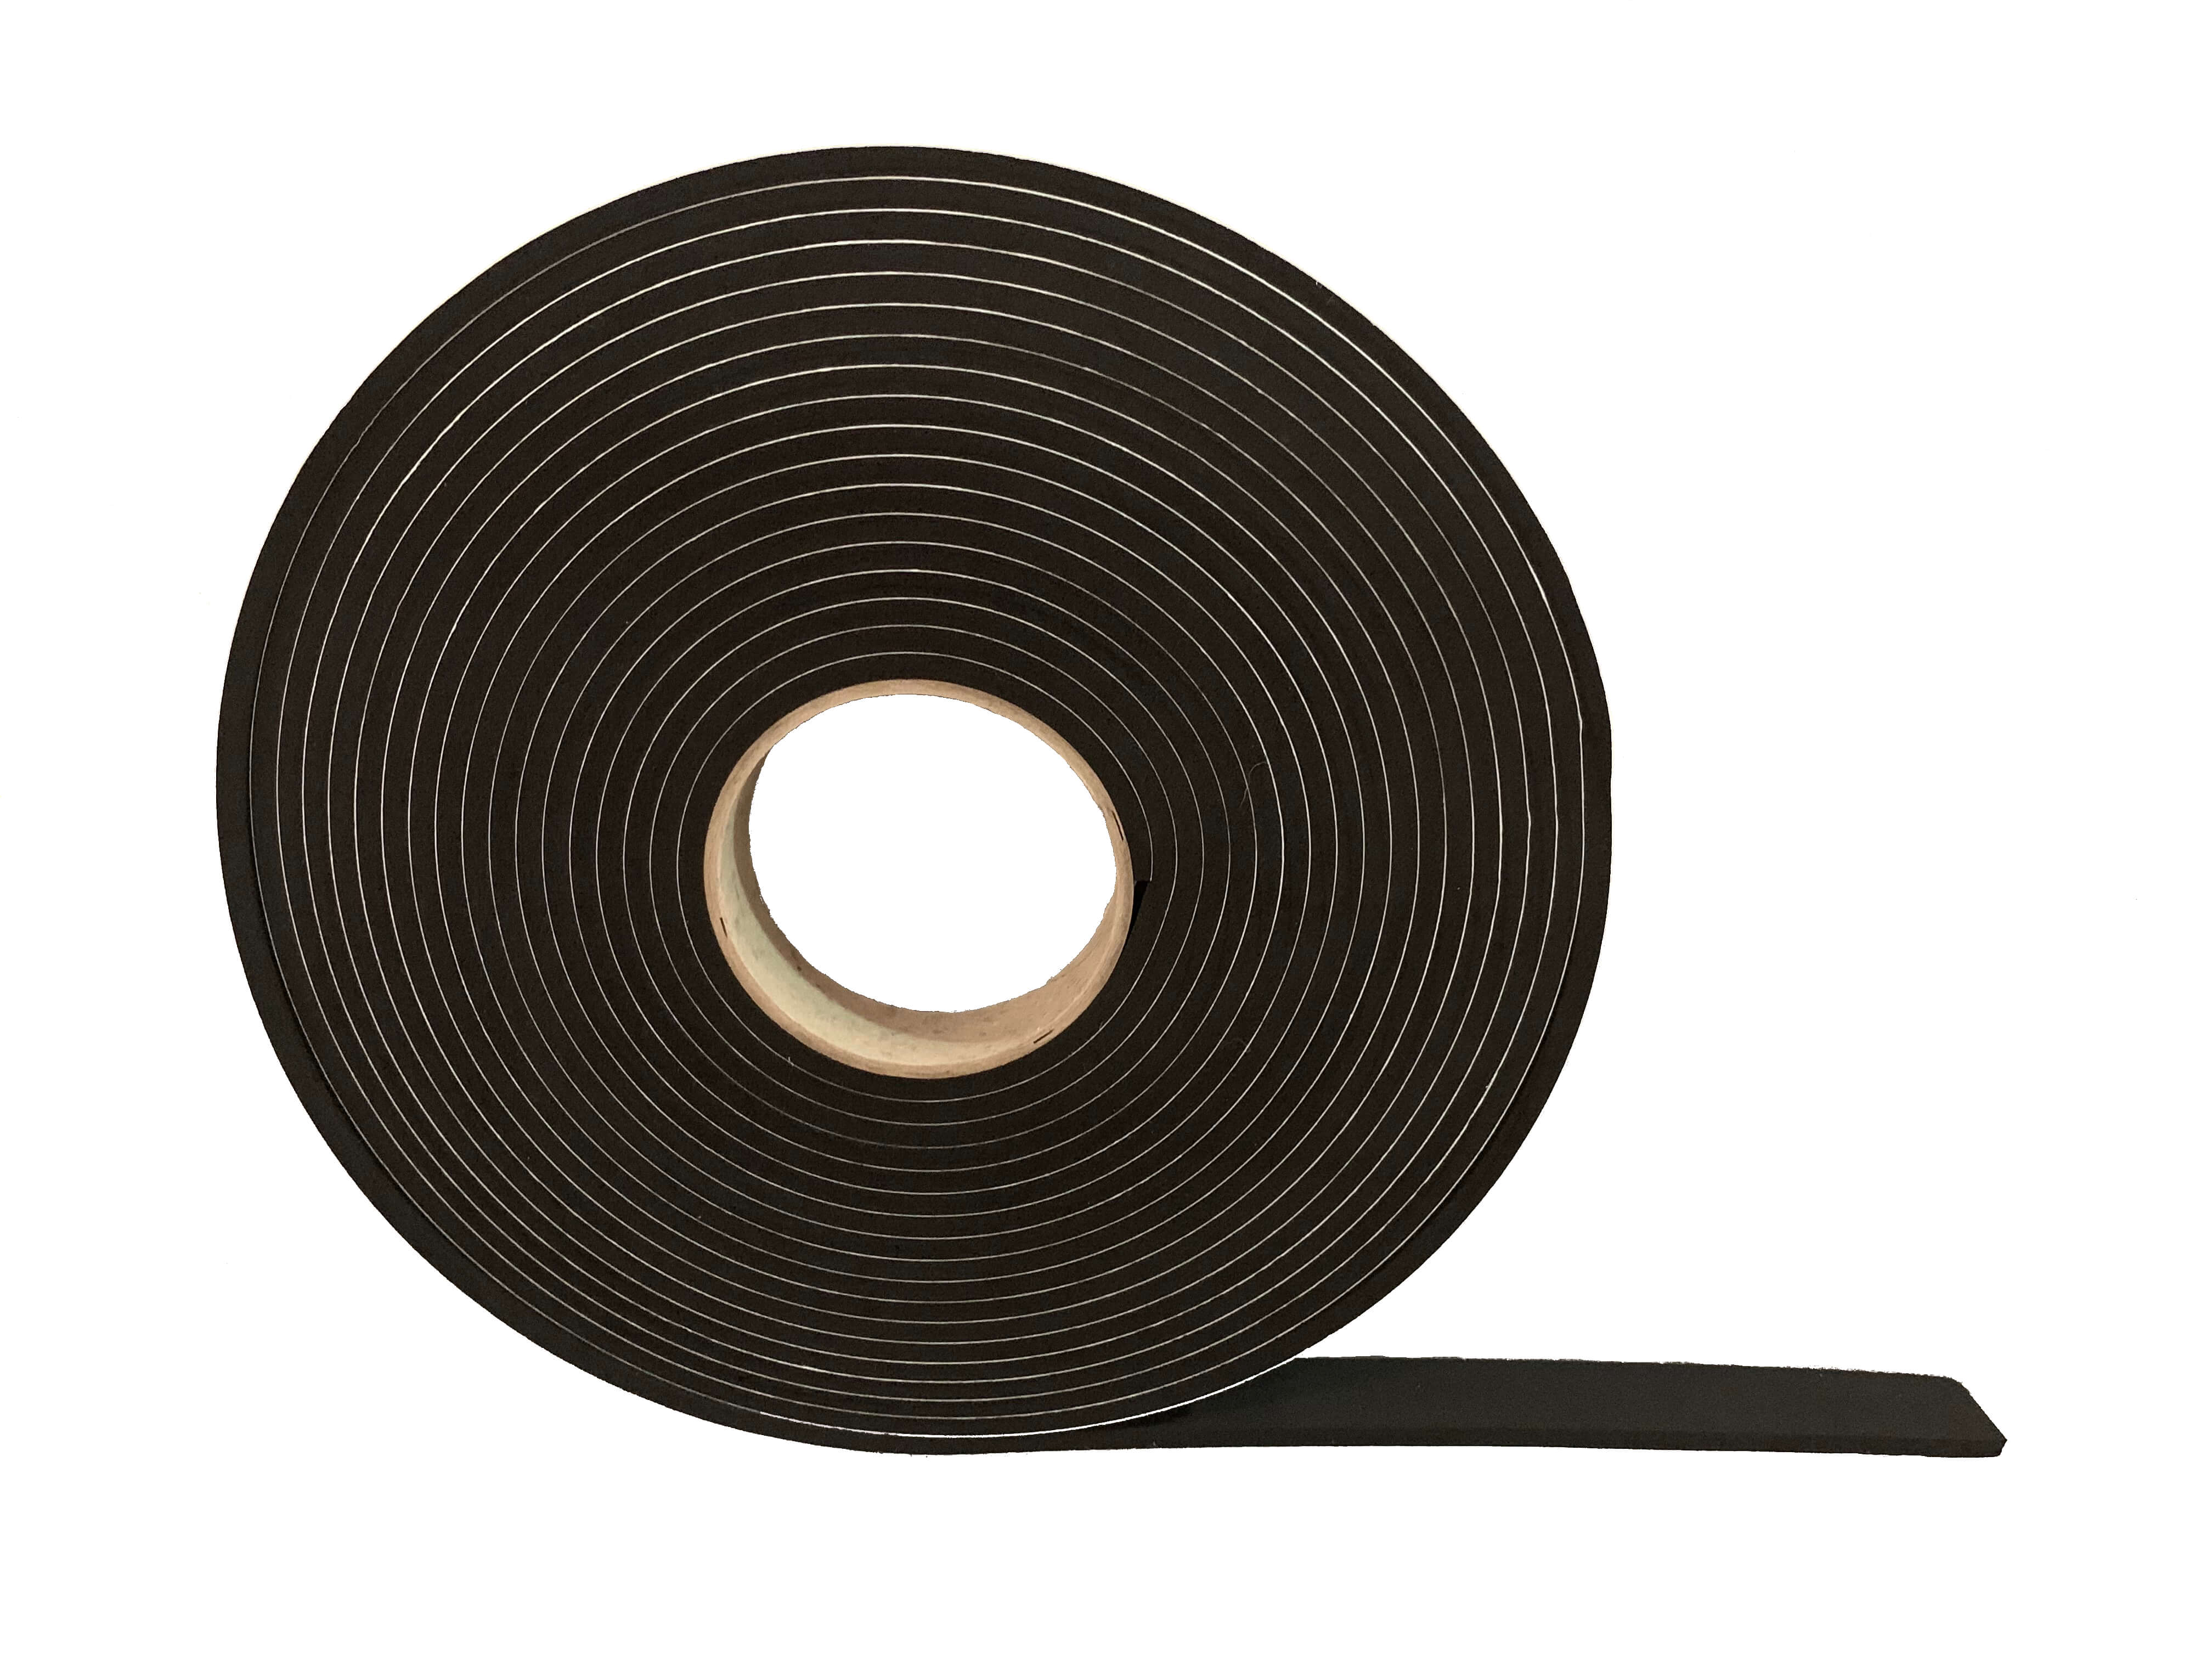 Resilient Sealing Tape - 5mm thick x 25mm wide x 10m long